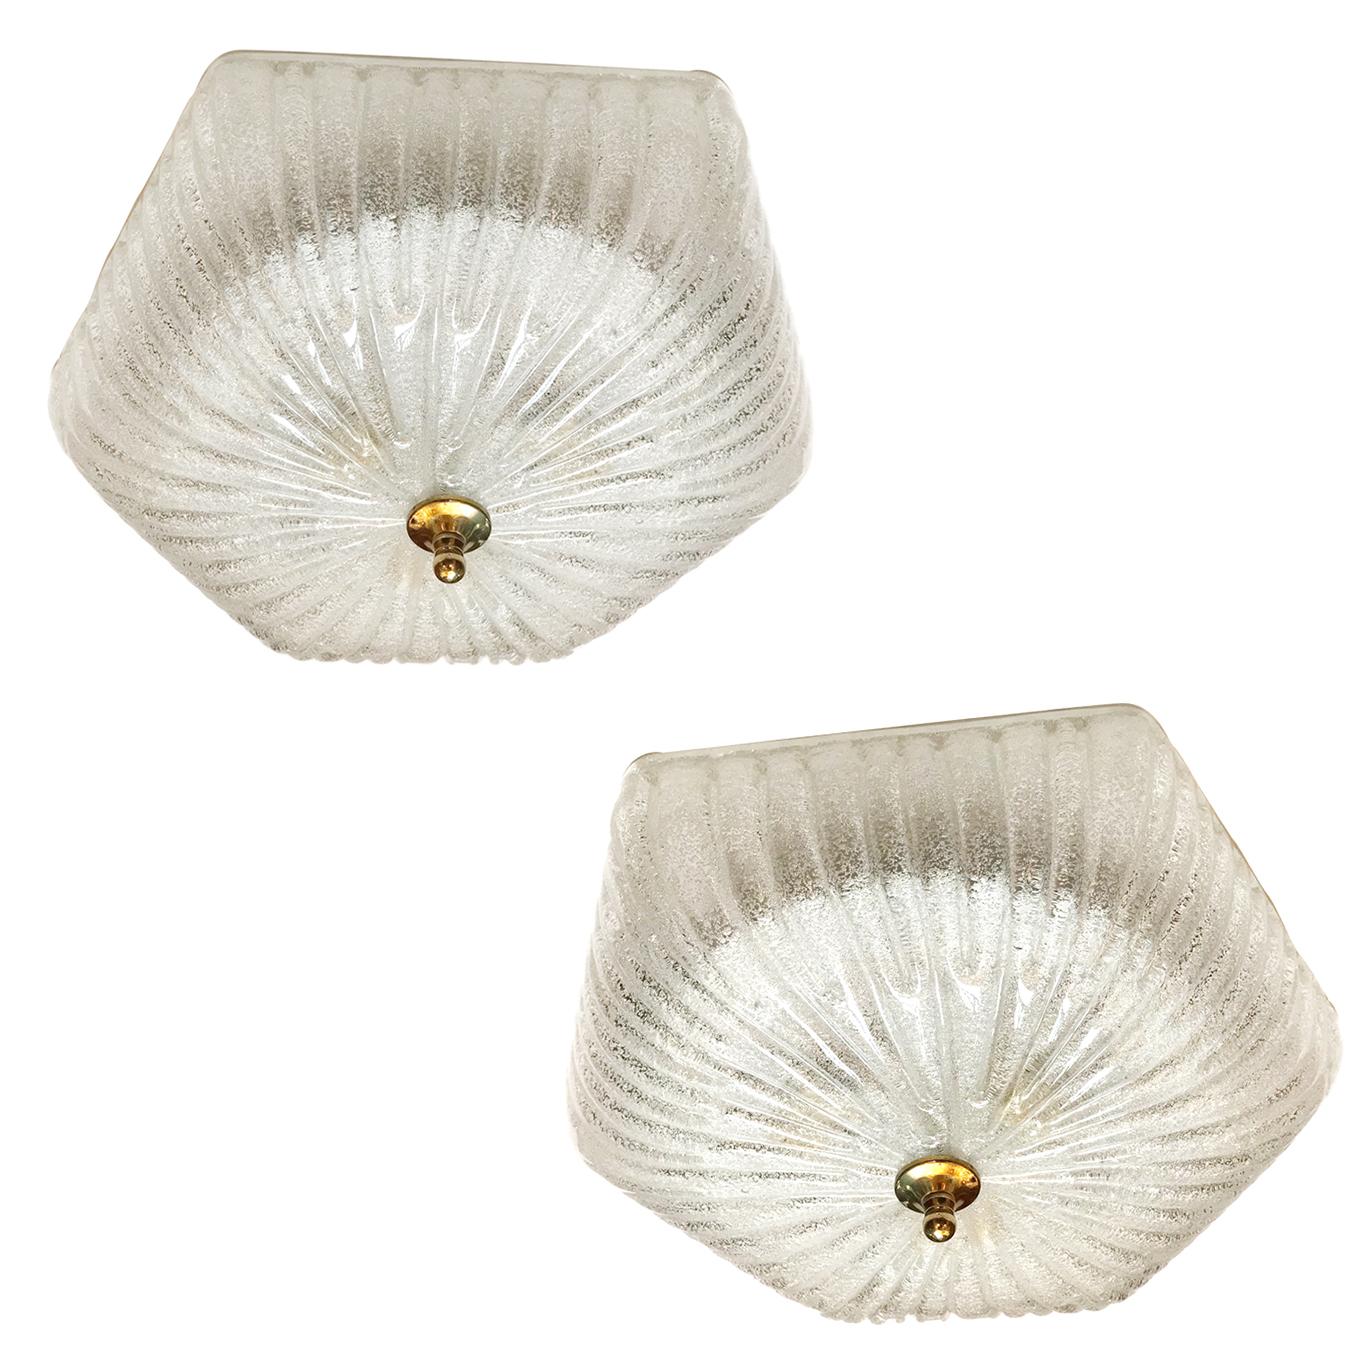 A pair of circa 1960s Italian molded glass flush-mounted light fixtures with interior lights. Sold individually.

Measurements:
Drop 4.5